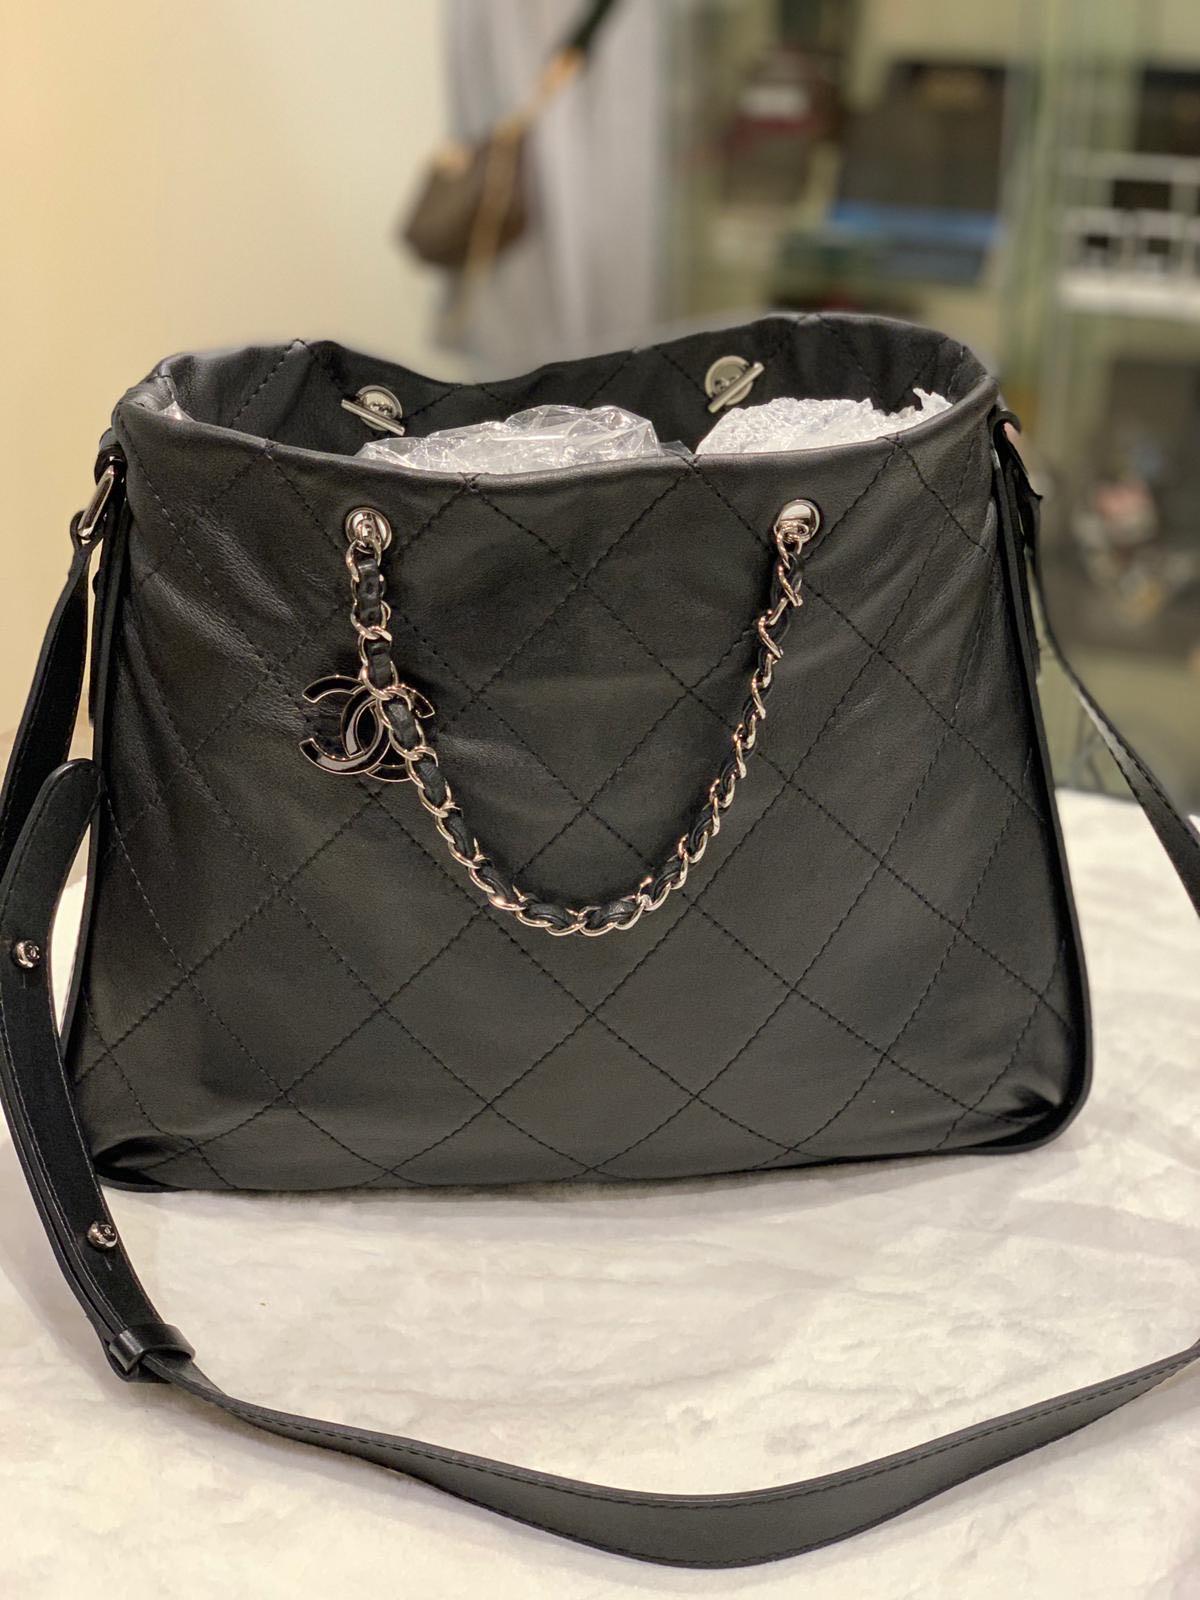 Chanel Tote Bag Black Leather 2 Way For Women